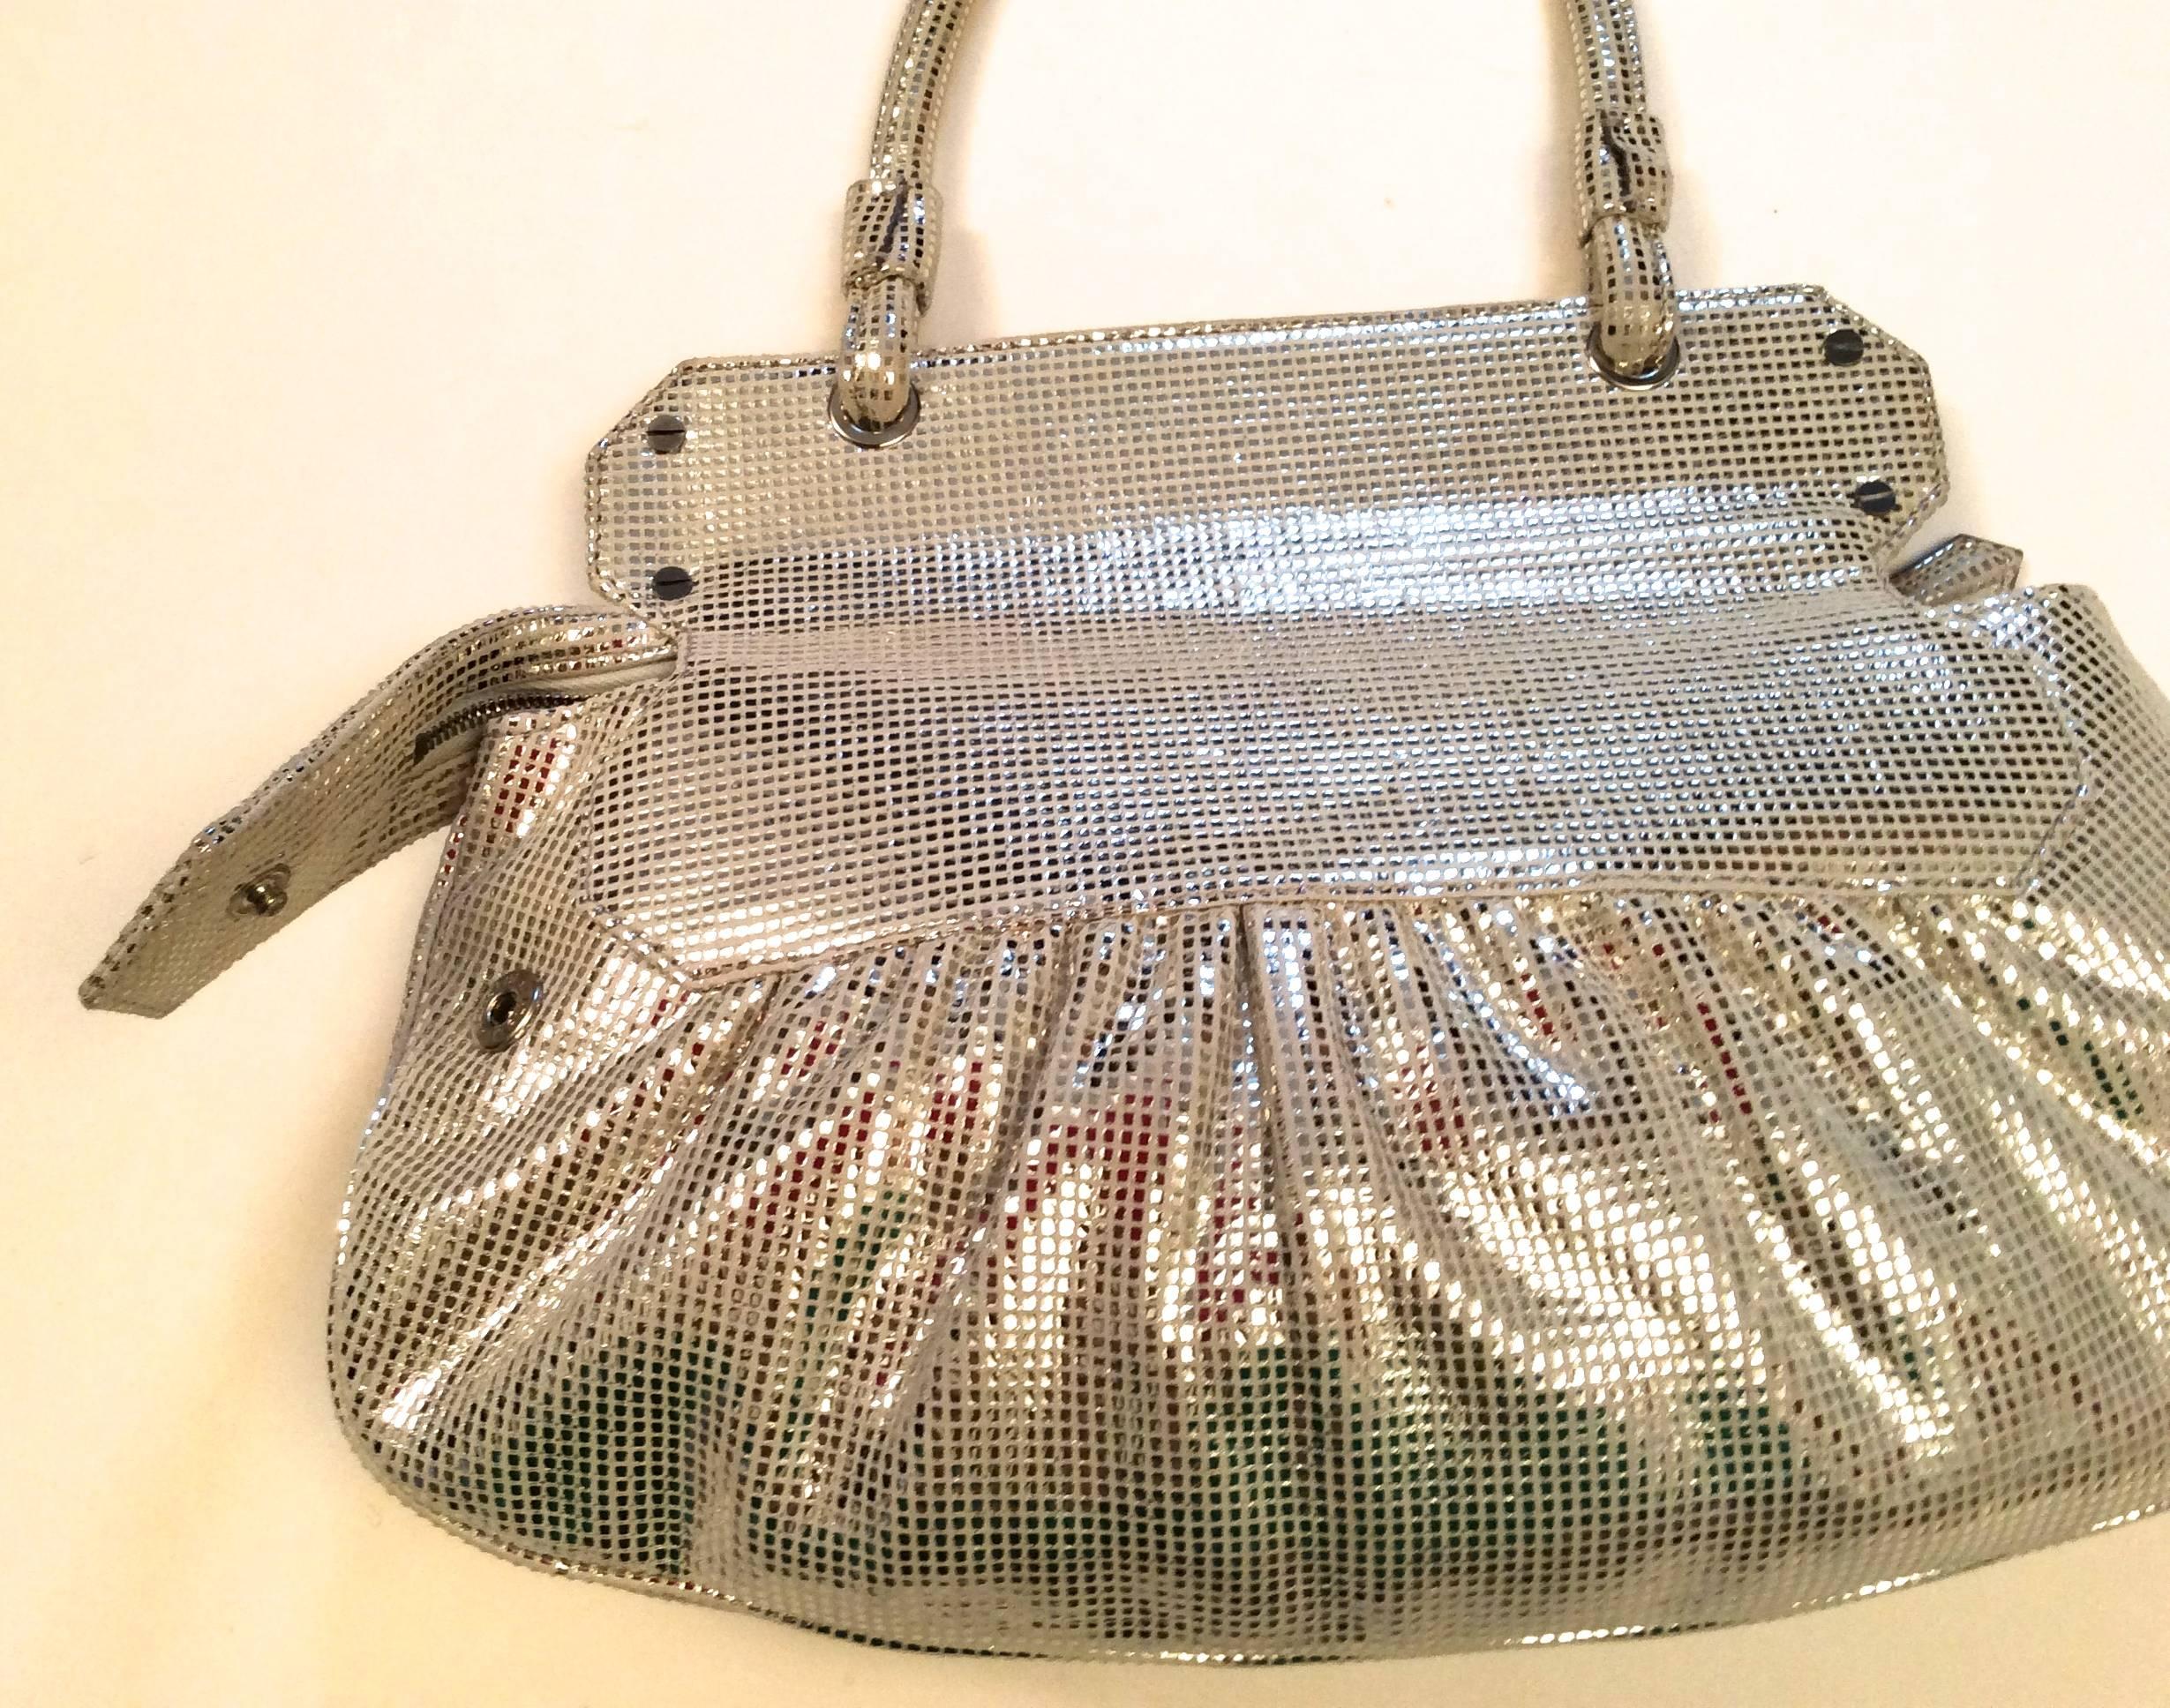 Beautiful New Fendi Bag - Fabulous Metallic - Leather and Suede In Excellent Condition For Sale In Boca Raton, FL